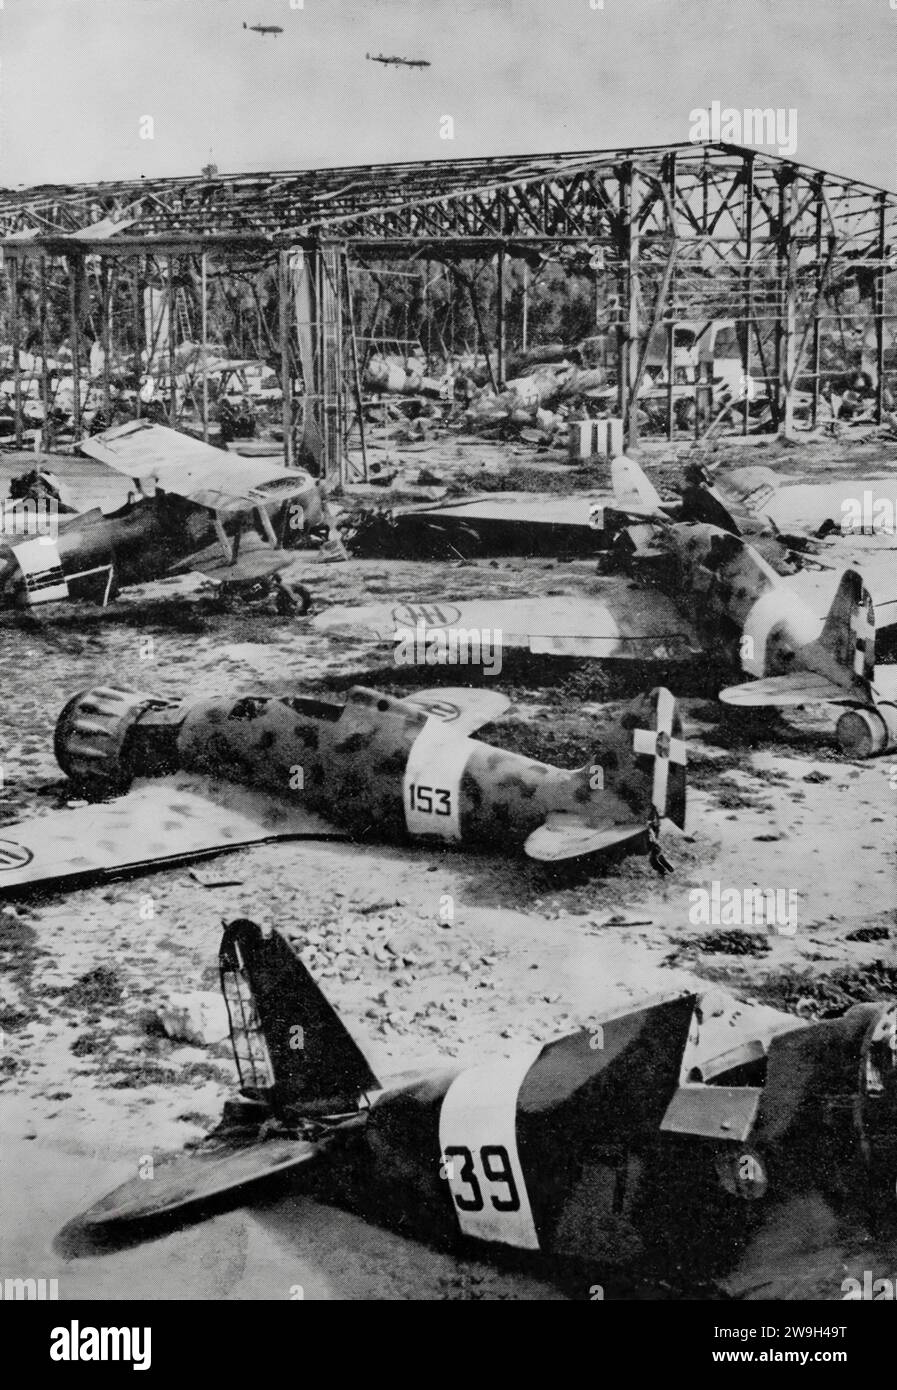 The remains of fighter aircraft at Castel Benito airfield near Tripoli created by the Italians in Italian Libya in the early 1930s. British and American bombers took out the Libyan airfields in December 1942 following the Allied Western Desert Campaign of the Second World War. Stock Photo